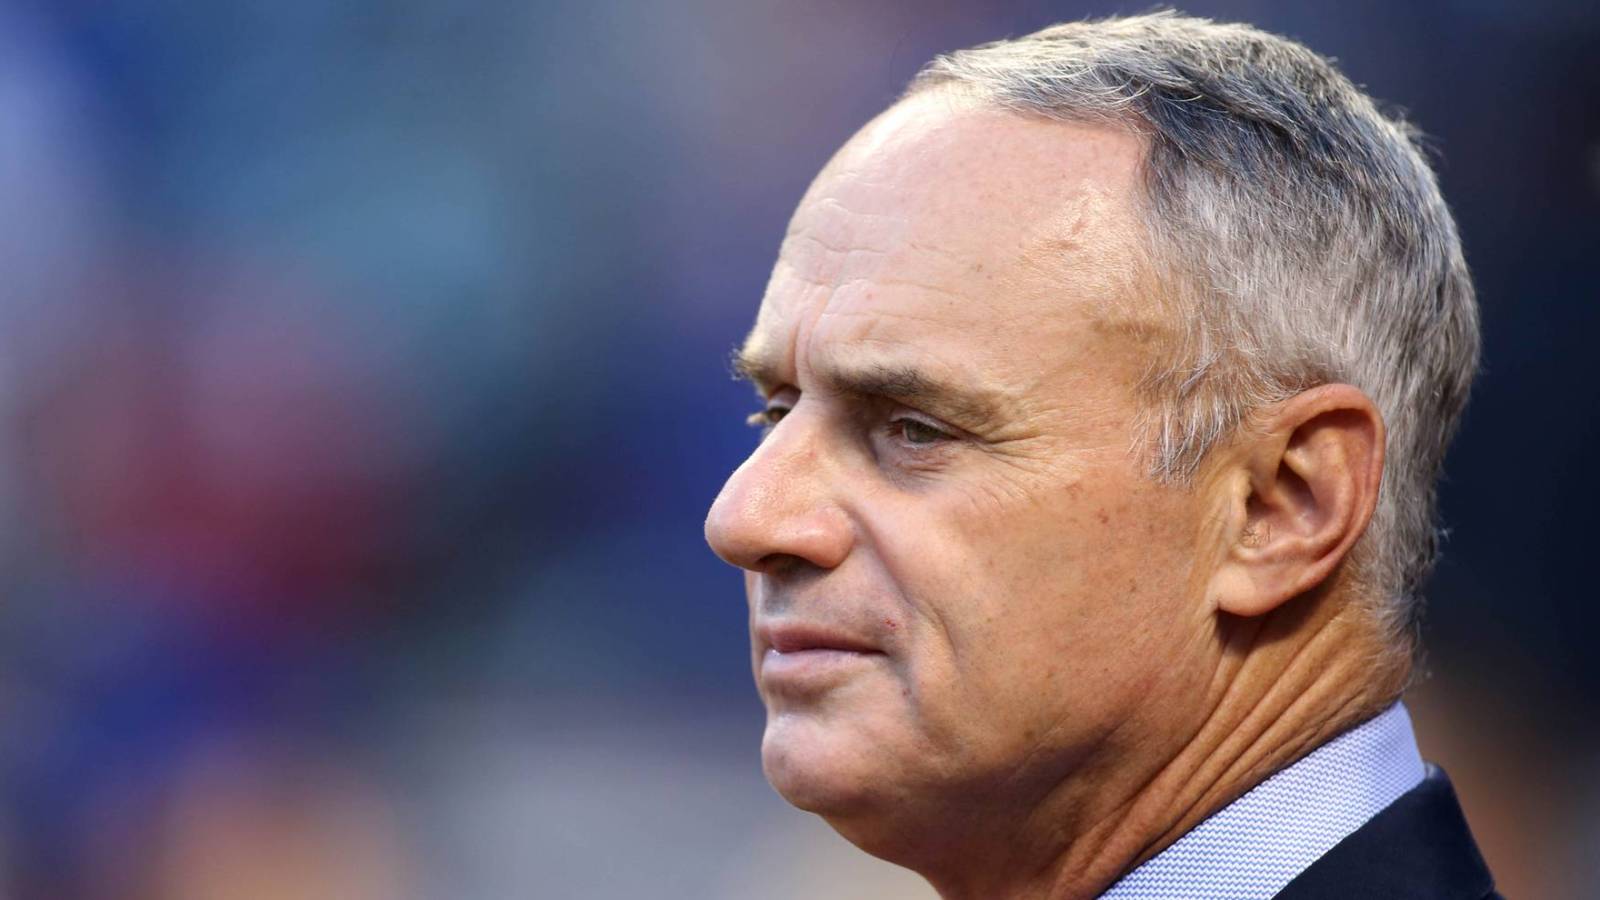 MLB’s CBA negotiations hit snags and ‘lockout’ talk pops up ...